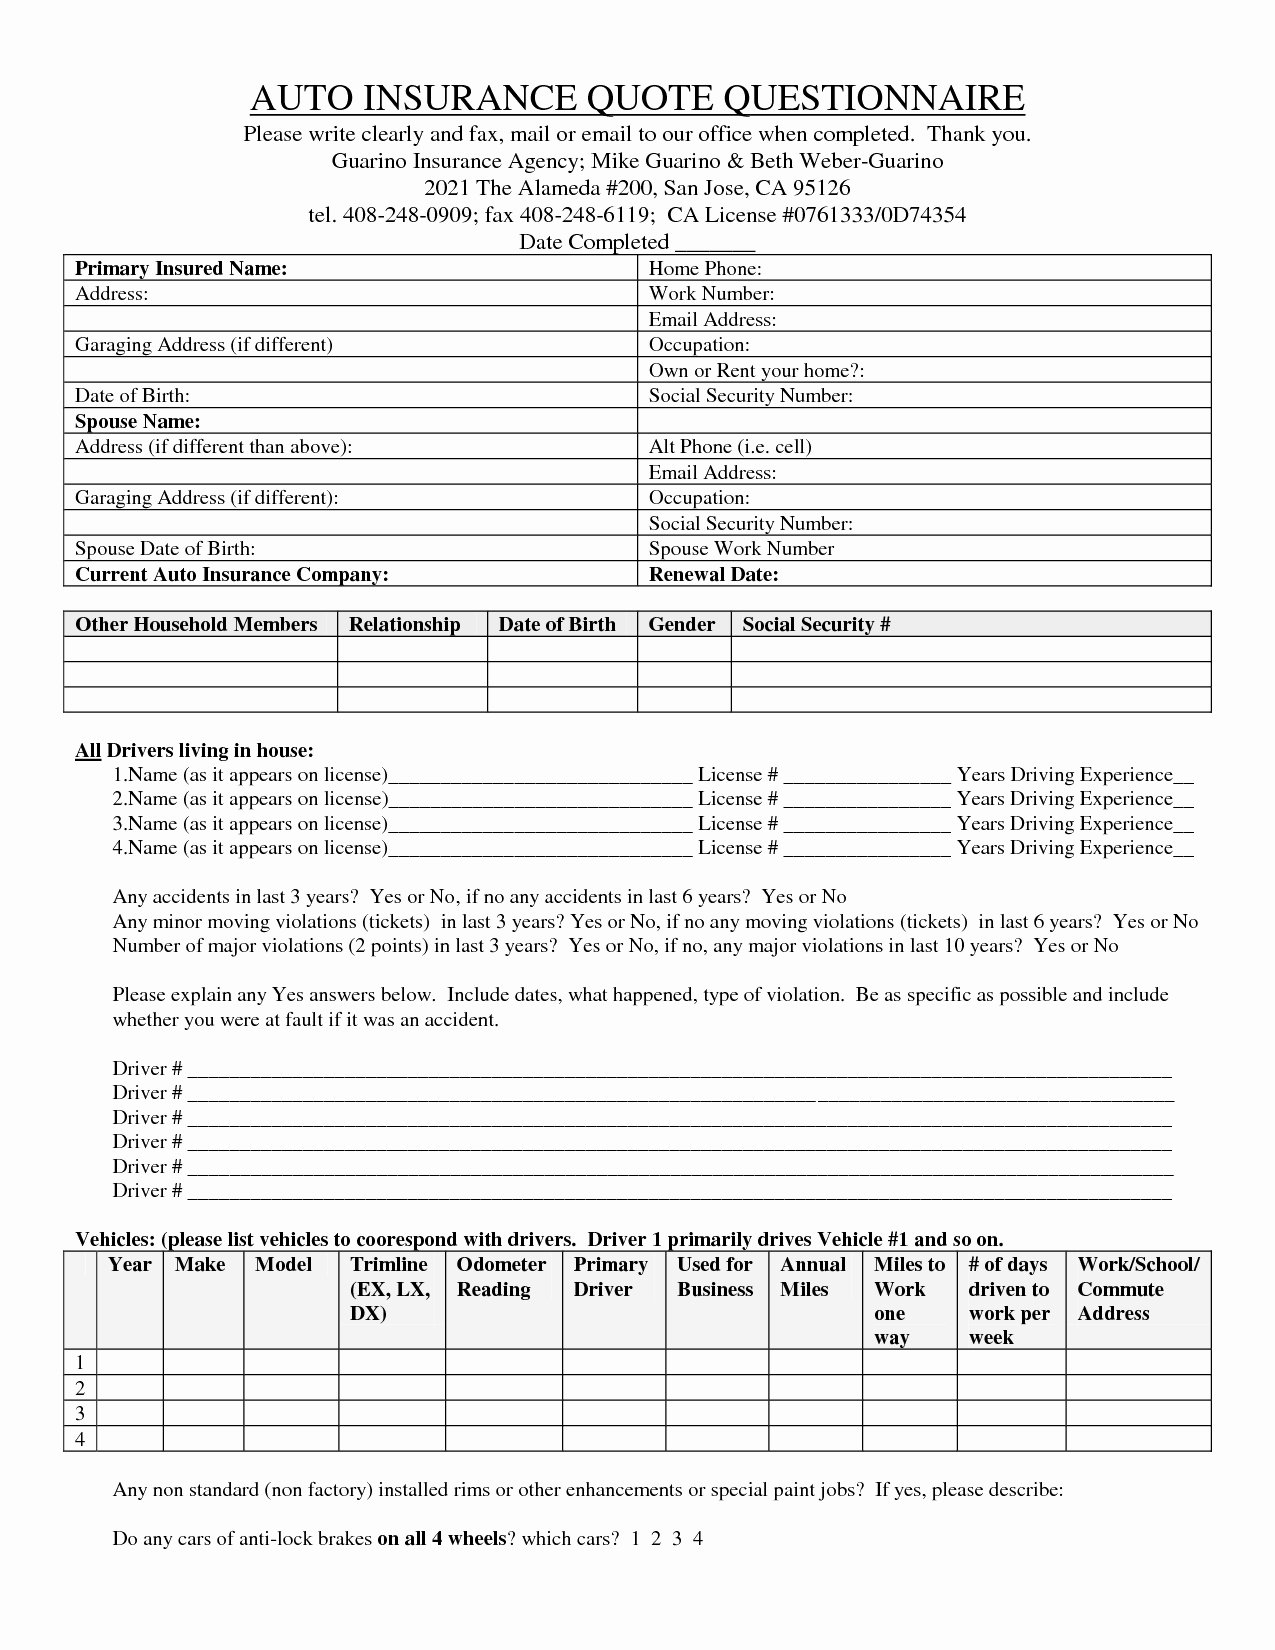 Fake Proof Of Insurance Template Lovely Auto Insurance Questionnaire Template